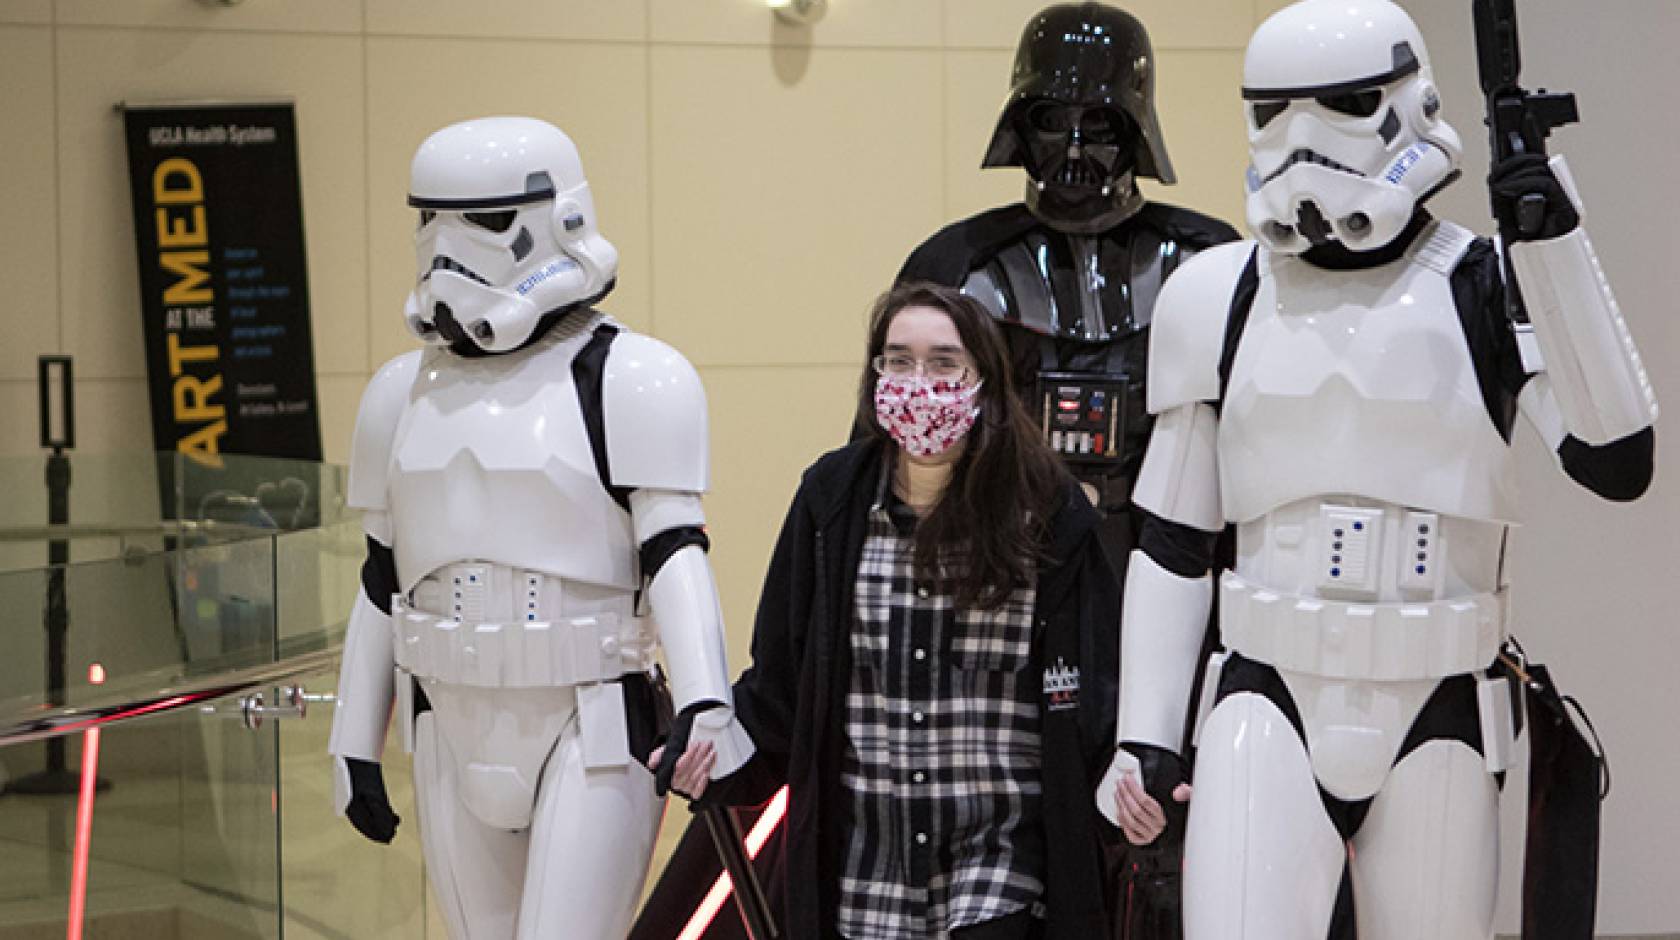 Following a lung transplant, Kathlyn Chassey makes a triumphant exit from the Reagan UCLA Medical Center on Wednesday, Jan. 11, accompanied by Darth Vader and storm troopers from "Star Wars."